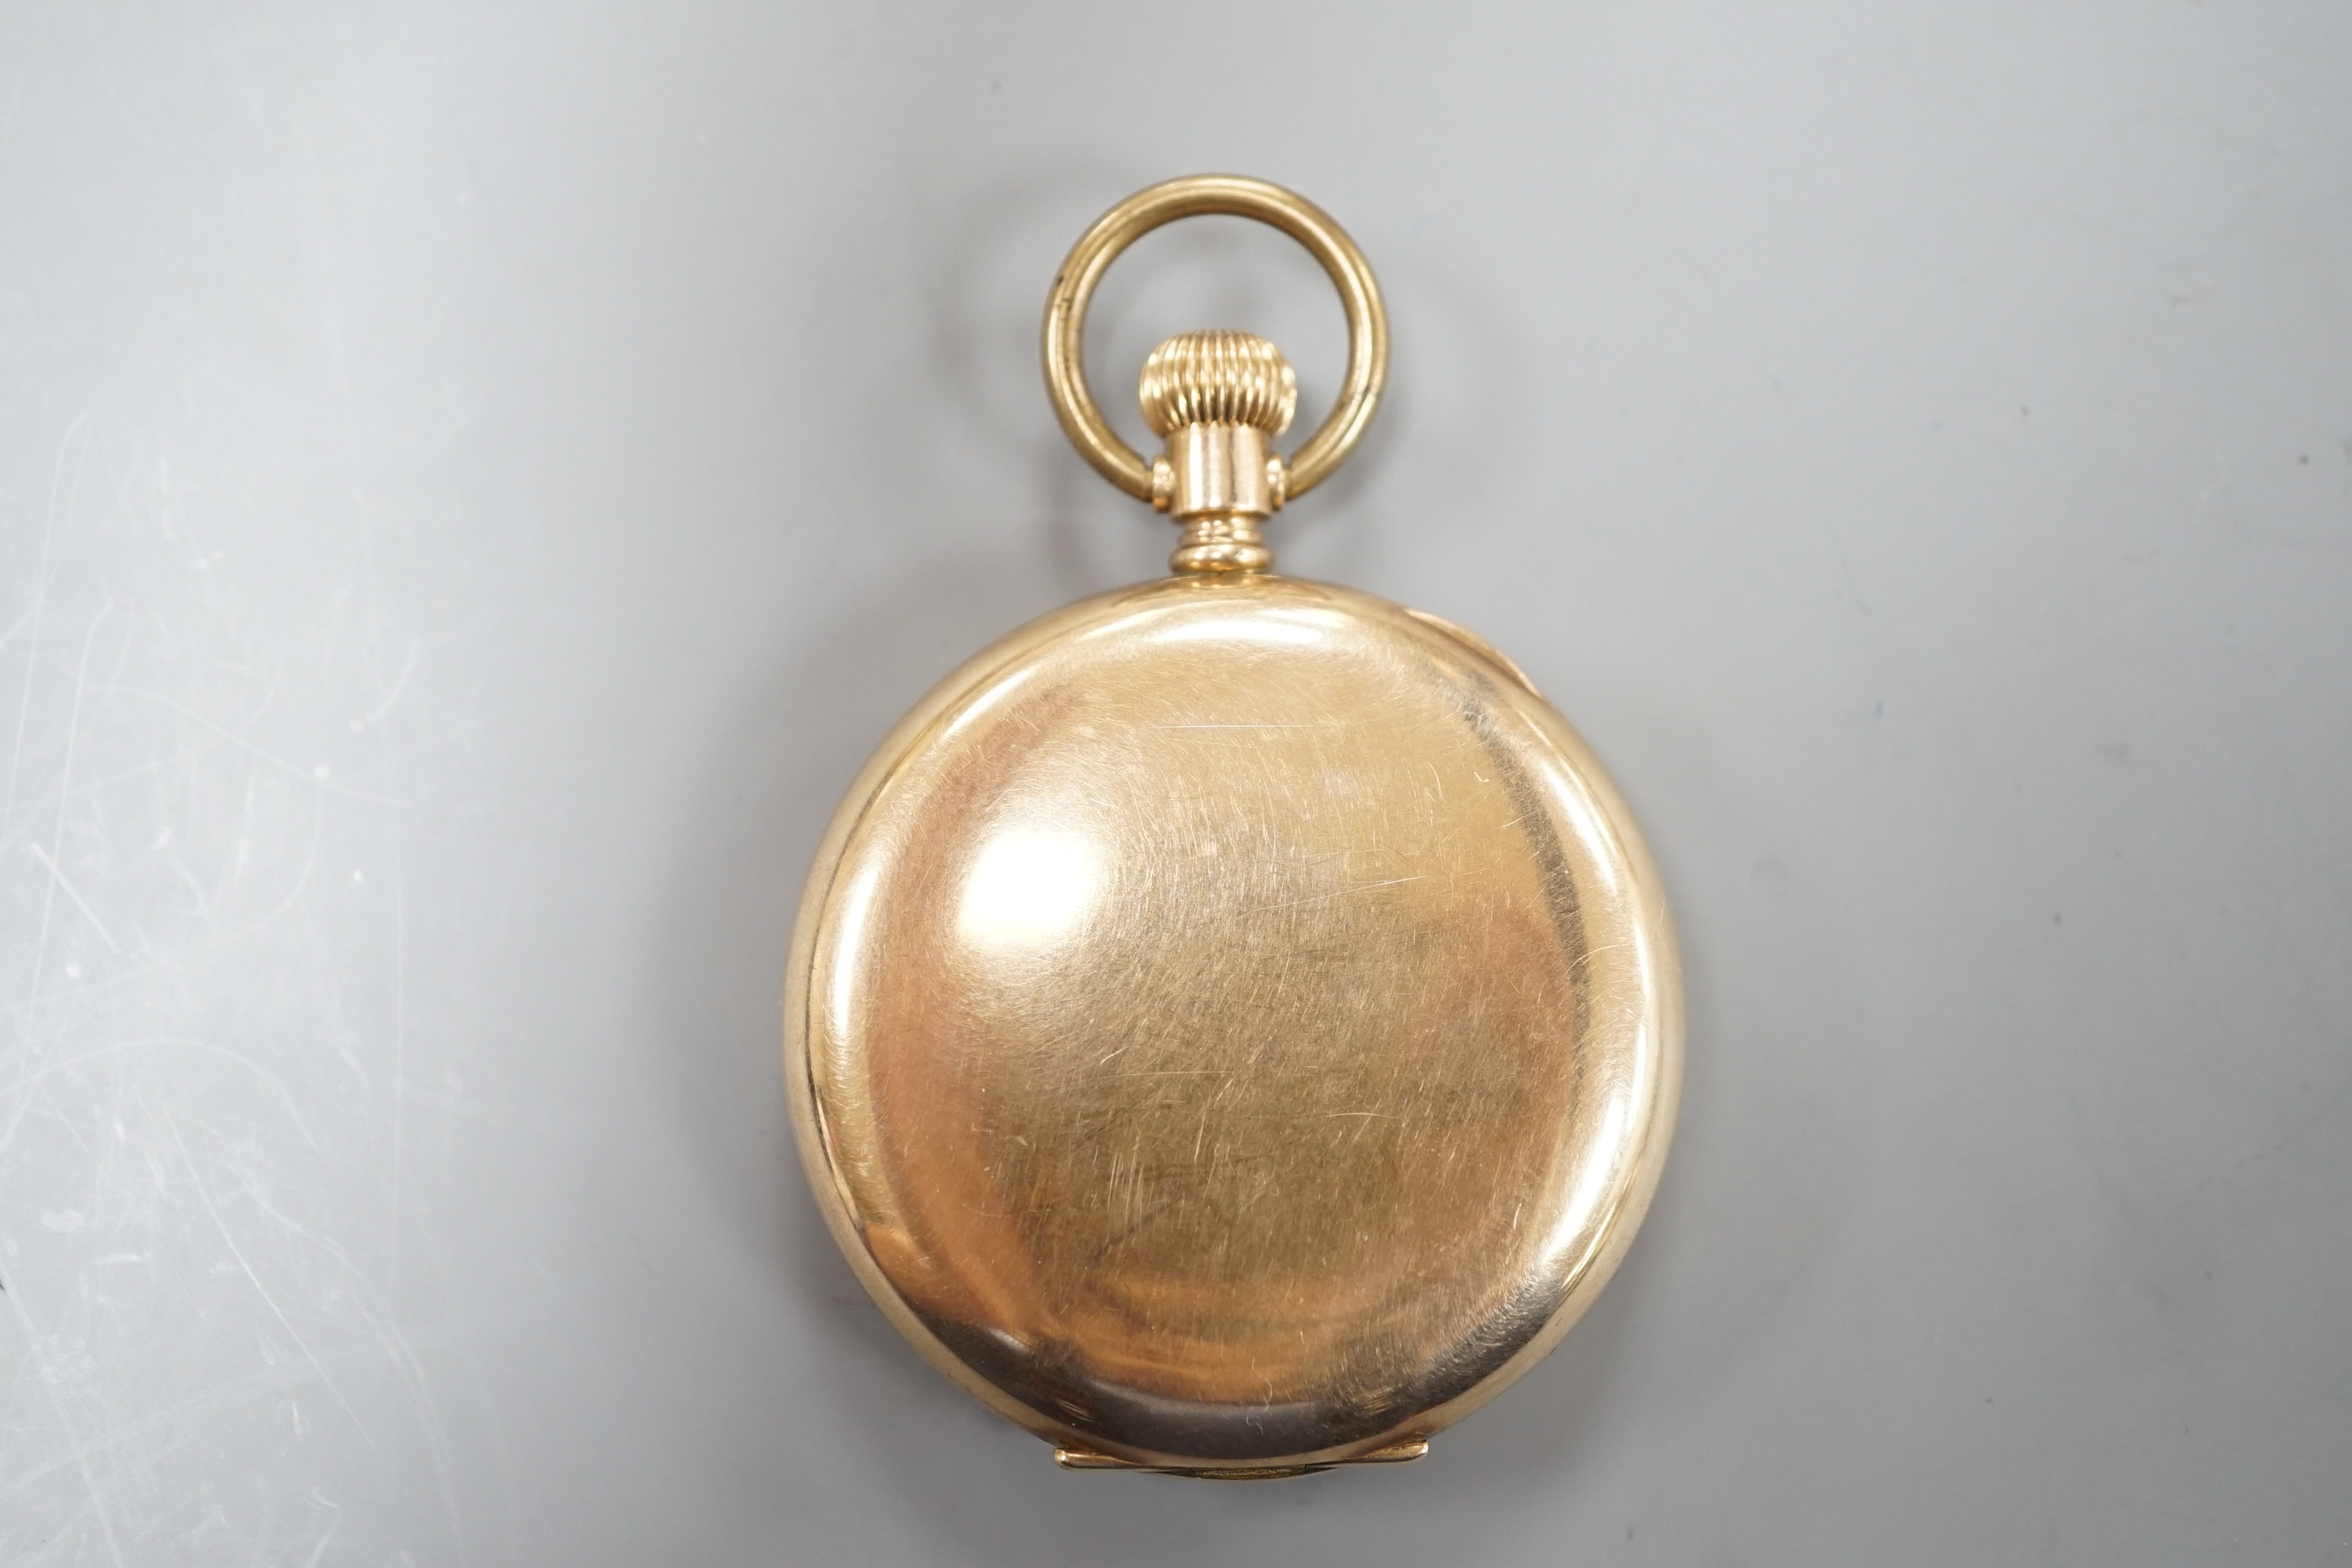 An Elgin gold plated hunter keyless pocket watch, with Roman dial and subsidiary seconds, the case with engraved monogram.